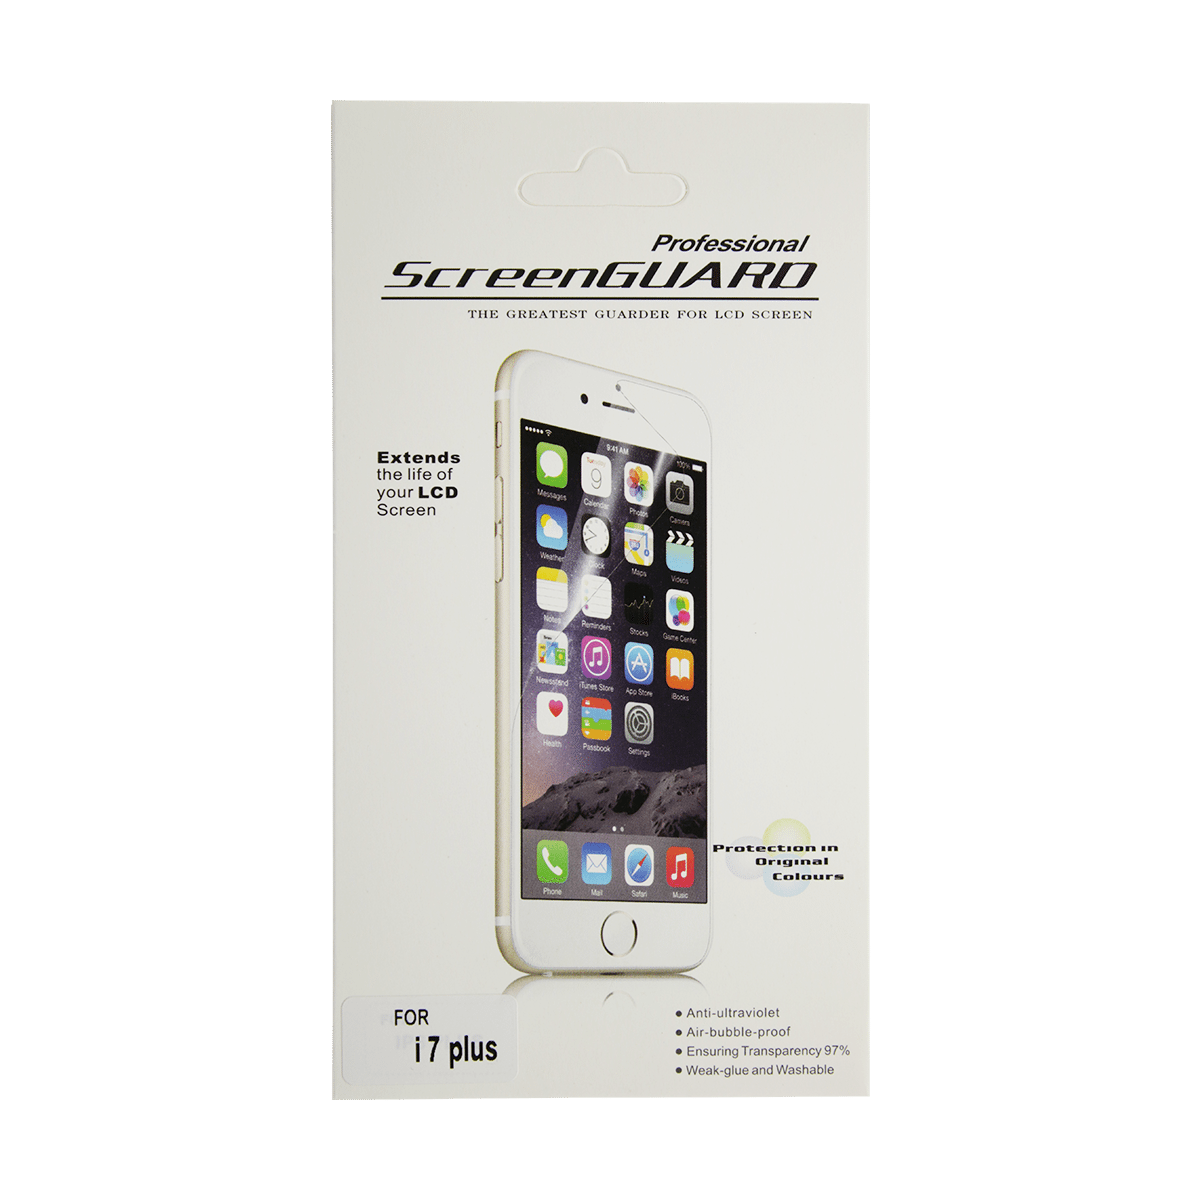 iPhone 8 Plus Clear Screen Protector